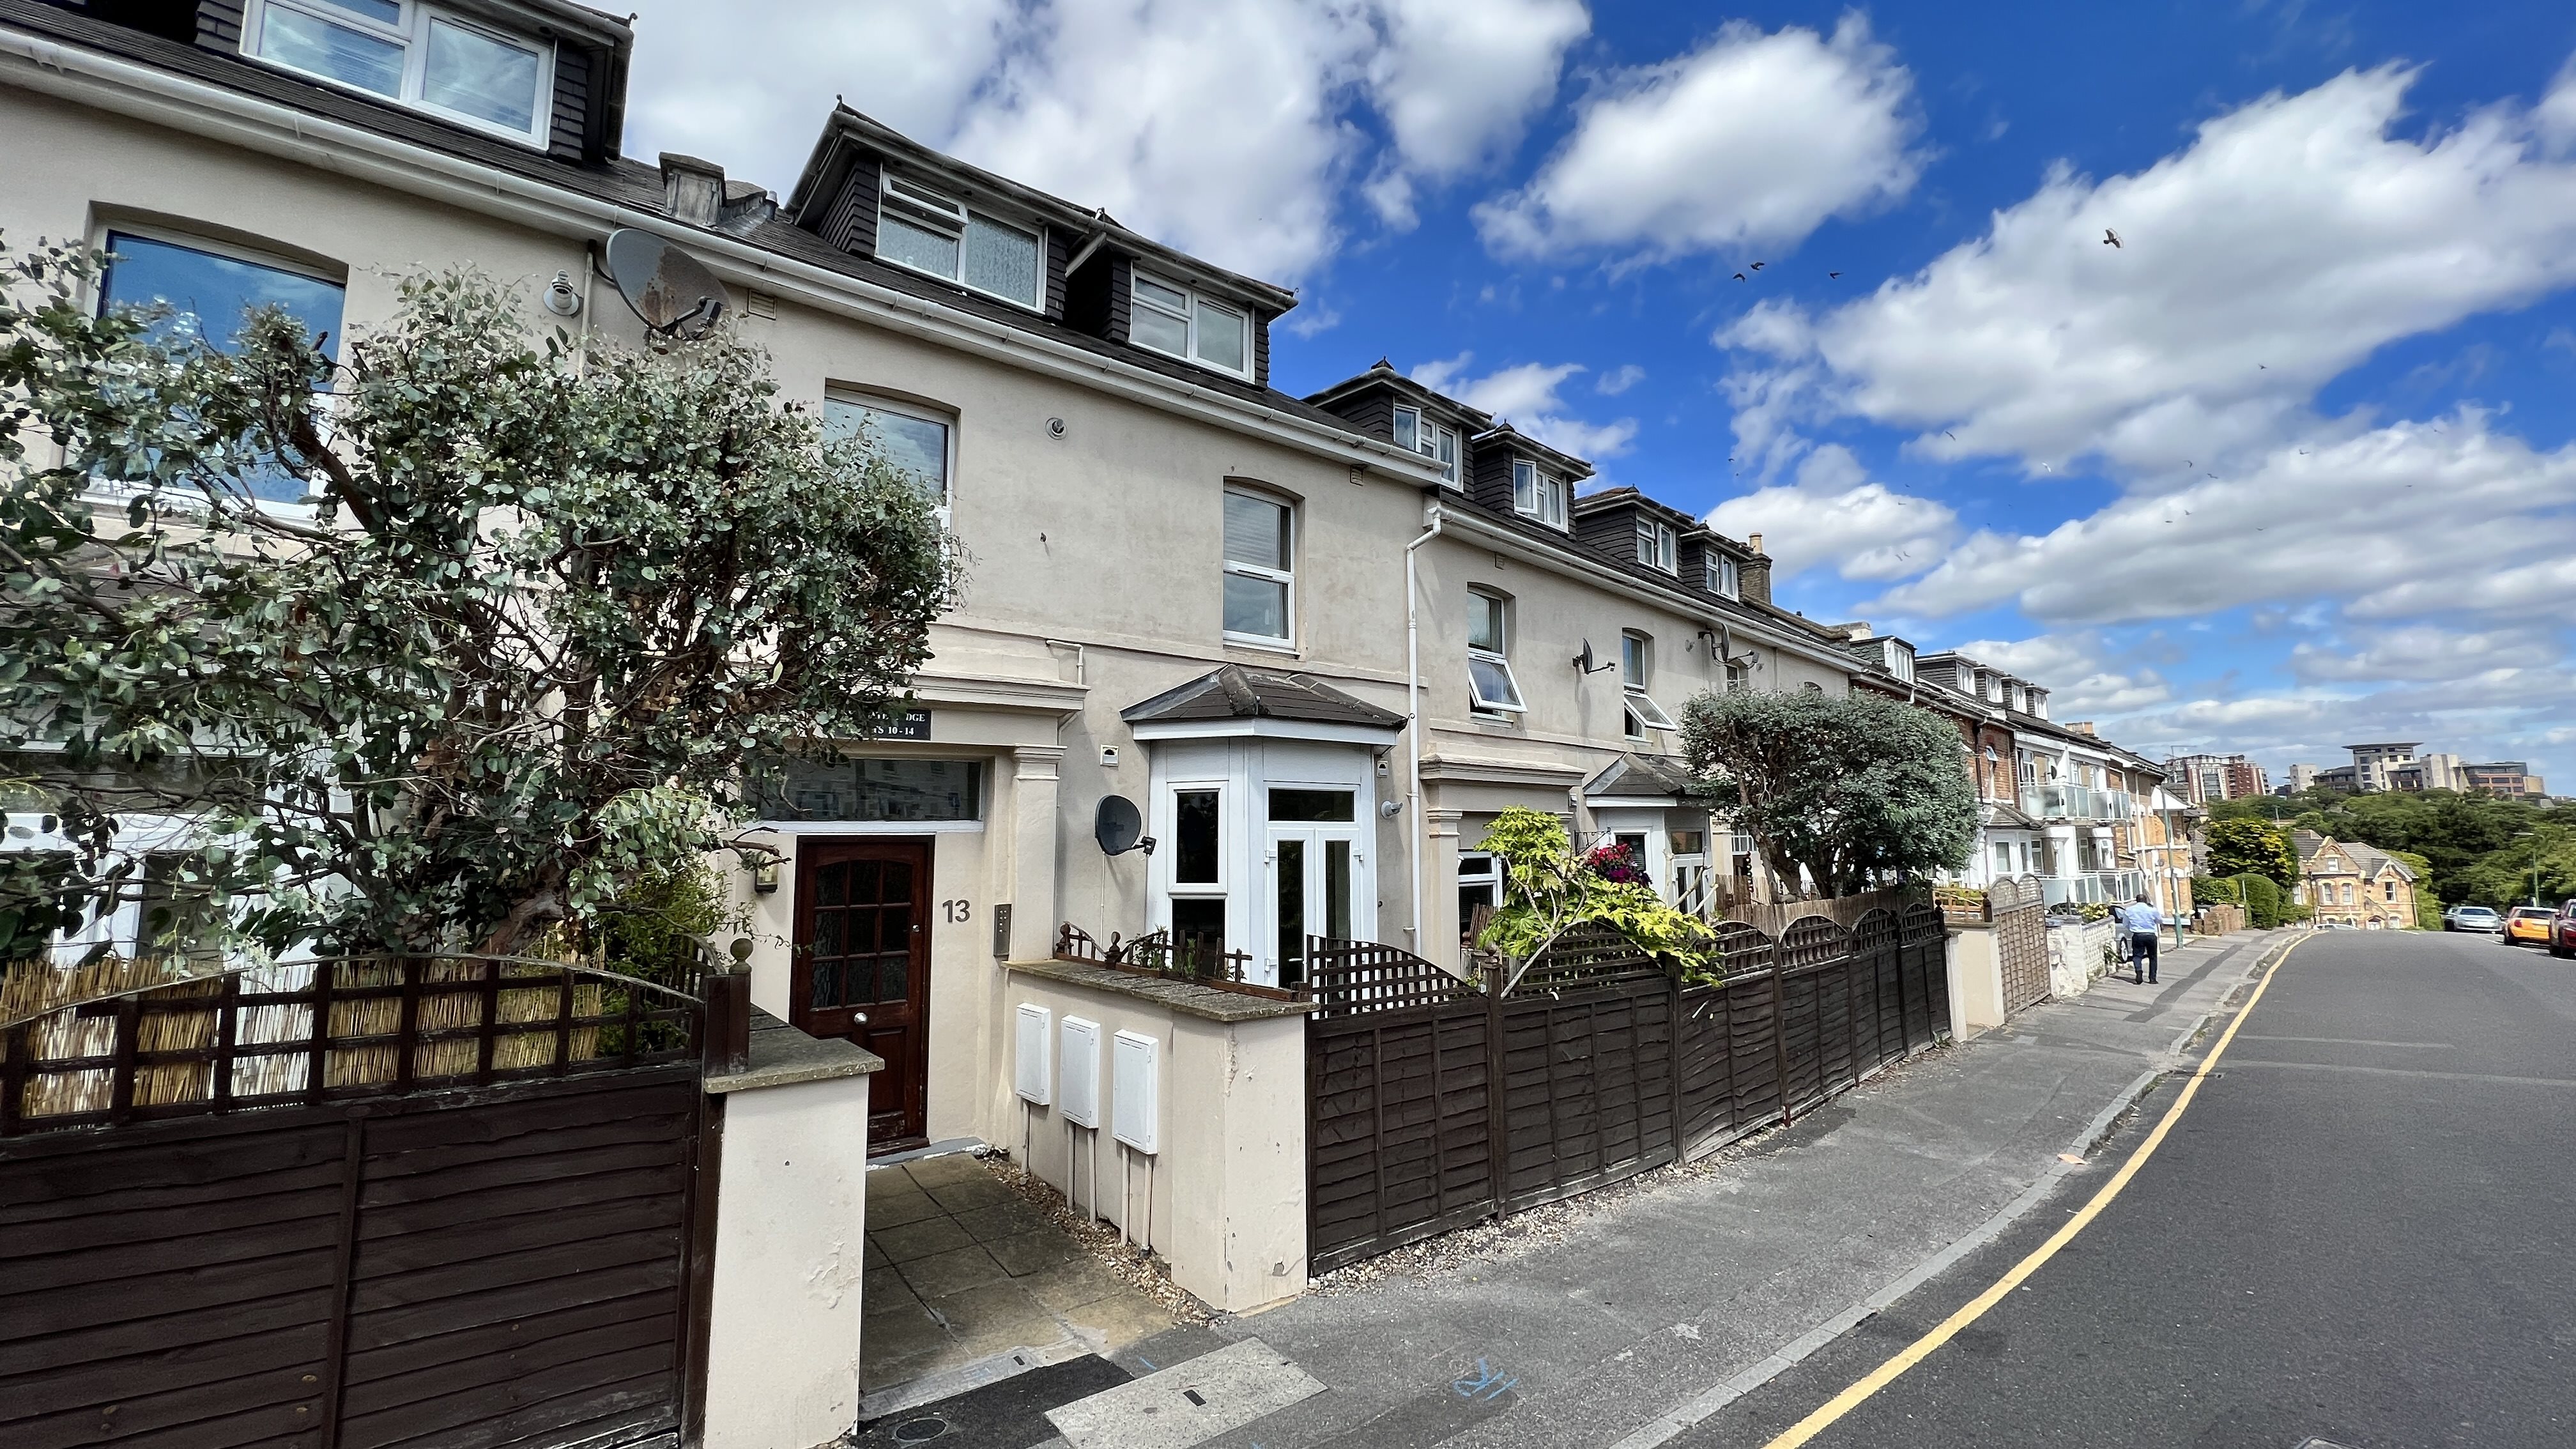 Christopher Shaw Residential is delighted to bring to the market this attractive 1 double bedroom 1st floor flat in the heart of Bournemouth Town Centre...